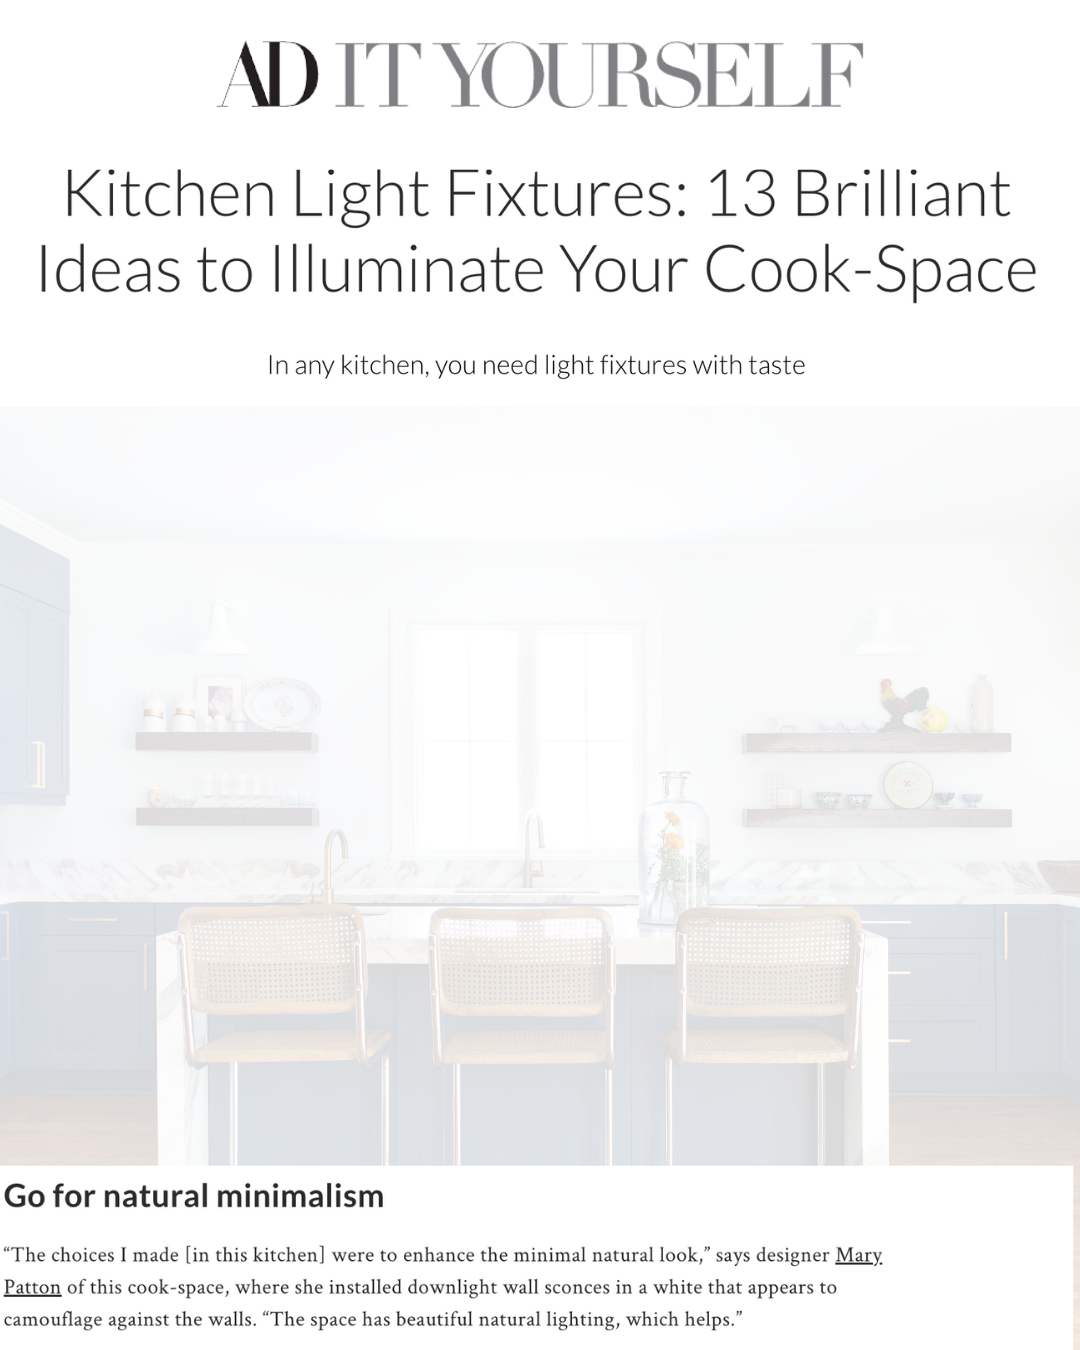 AD It Yourself Kitchen Light Fixtures.png